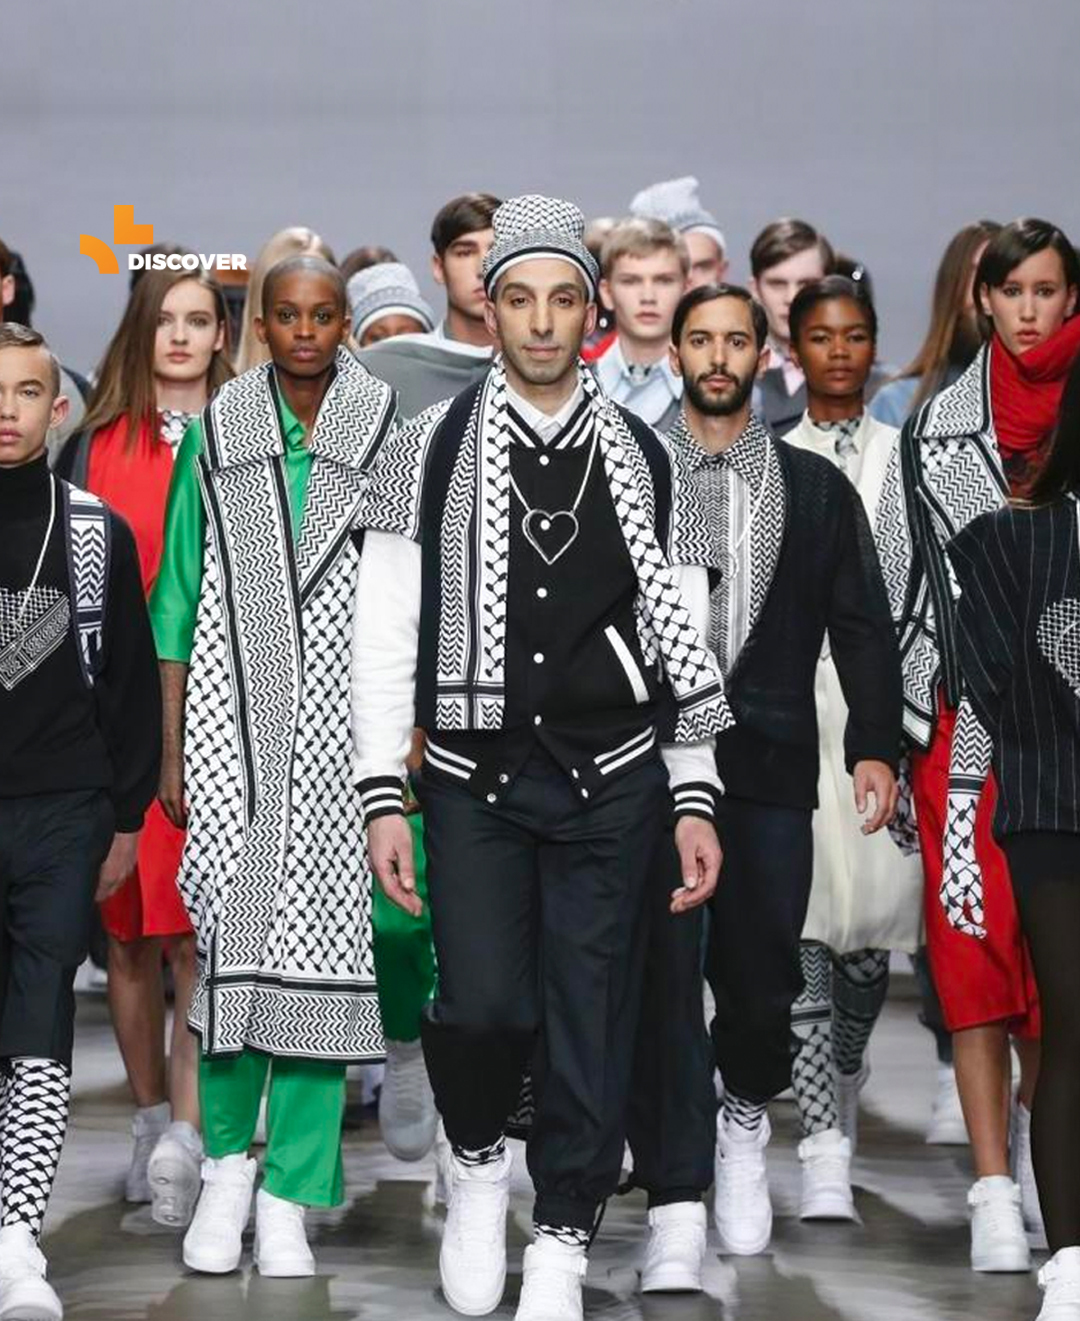 Discover on X: 📸 In pictures: Aziz Bekkaoui on fashion, the keffiyeh and  resistance. The Dutch-Moroccan fashion designer says he wants to explore  the Palestinian keffiyeh's role as a symbol of the